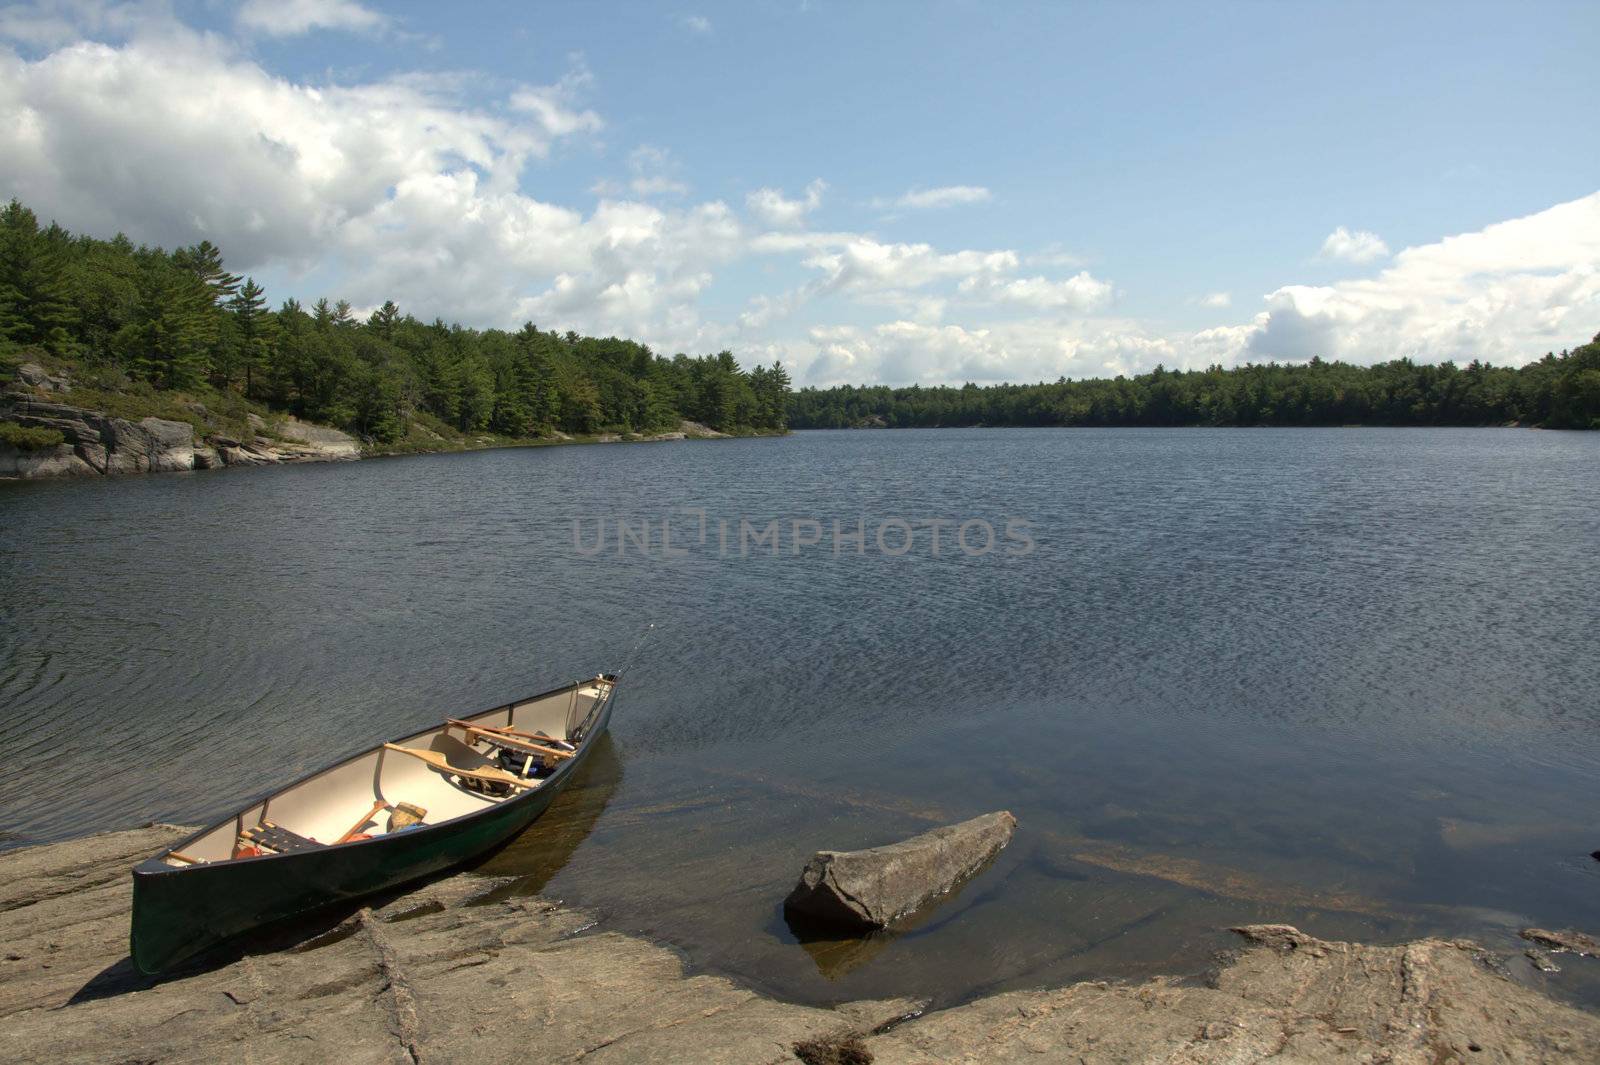 An image of a canoe in the Honey Harbour area of Georgian Bay, on a beautiful sunny day.